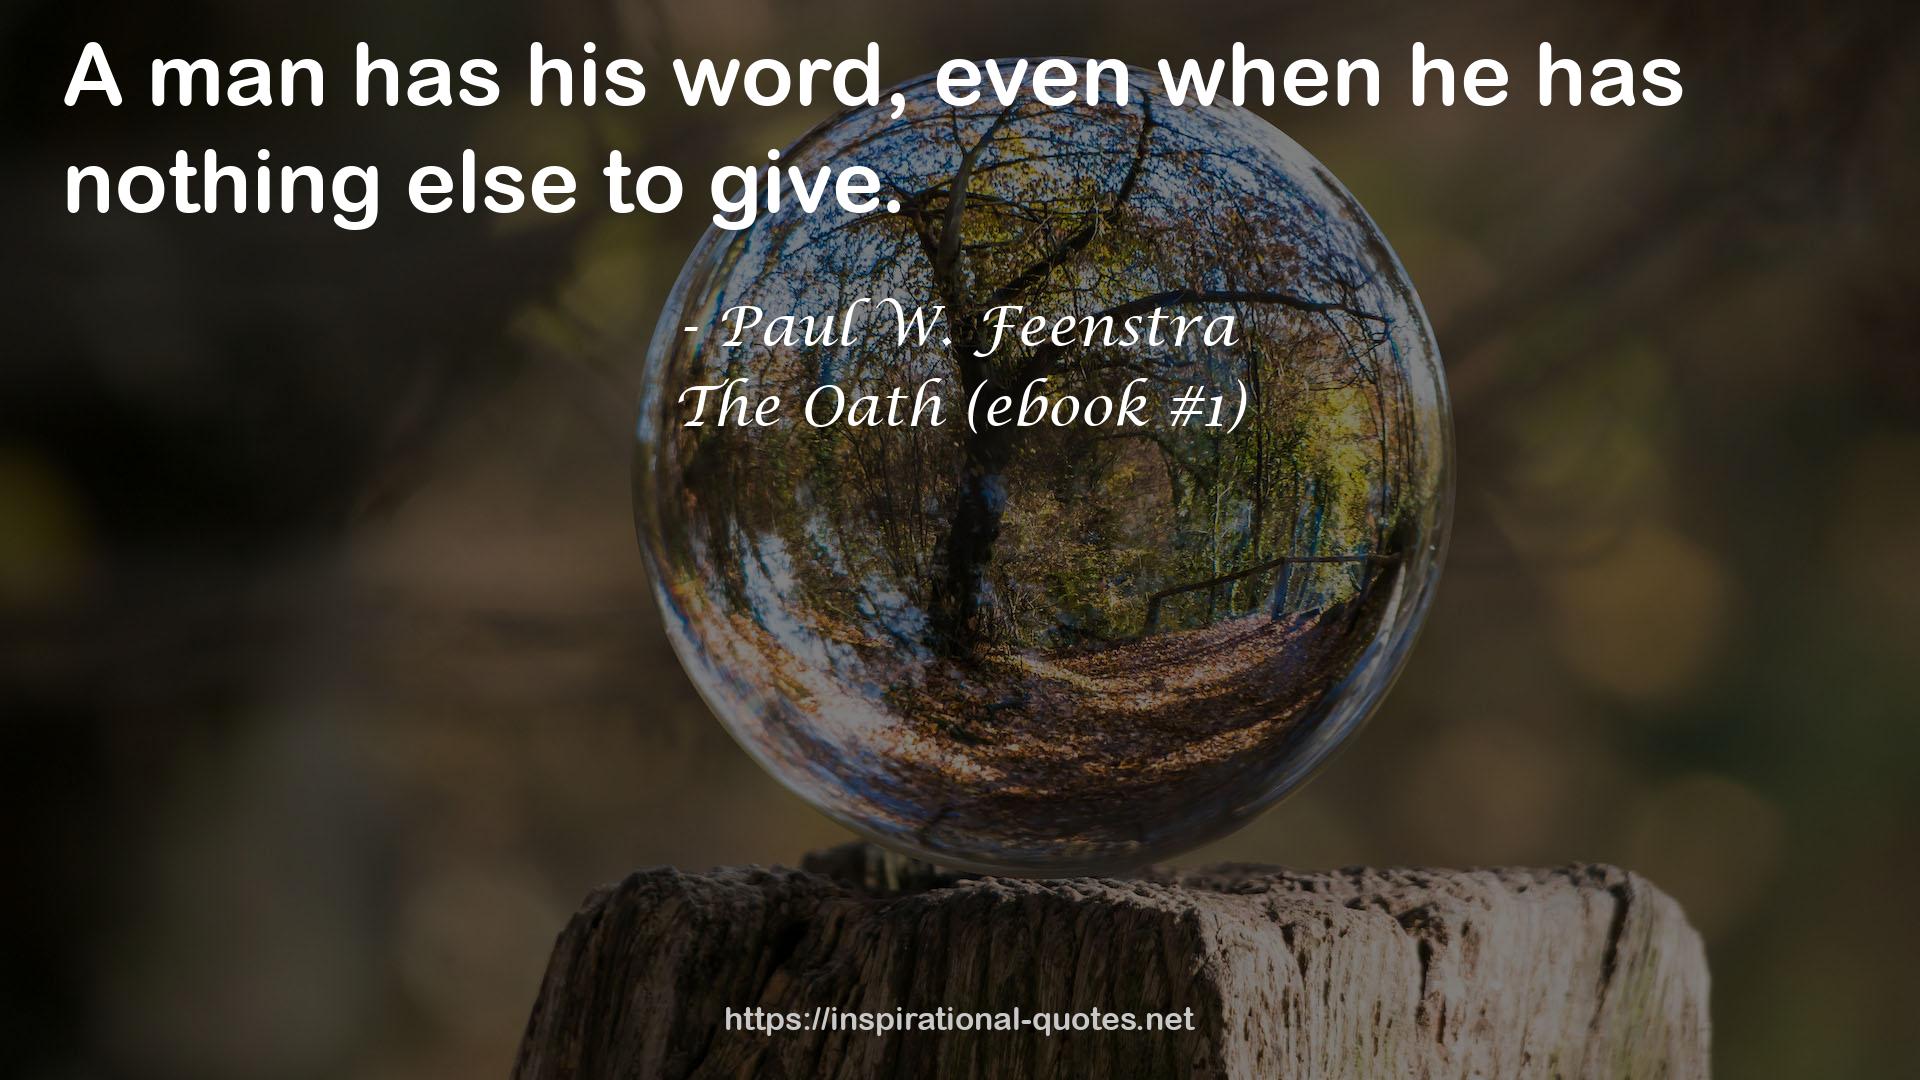 The Oath (ebook #1) QUOTES